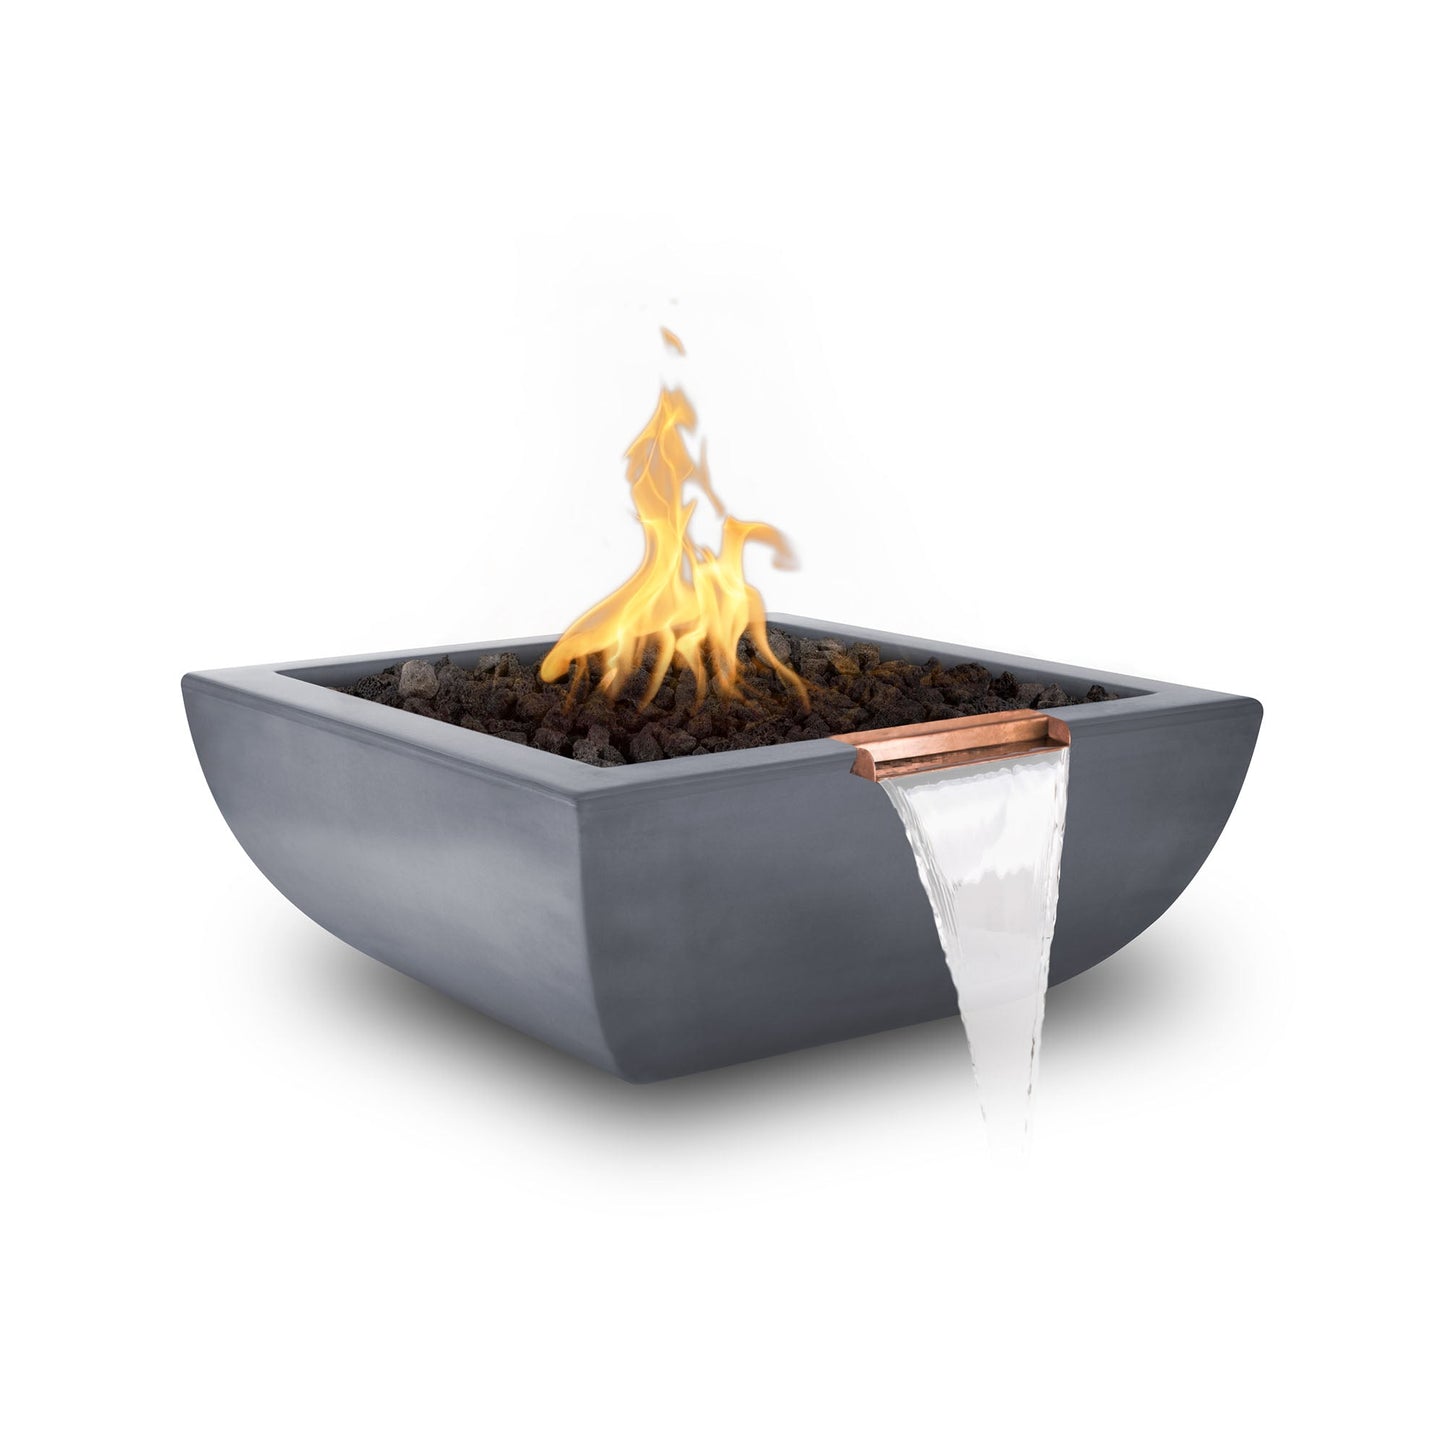 The Outdoor Plus Square Avalon 30" Metallic Bronze GFRC Concrete Natural Gas Fire & Water Bowl with Match Lit with Flame Sense Ignition